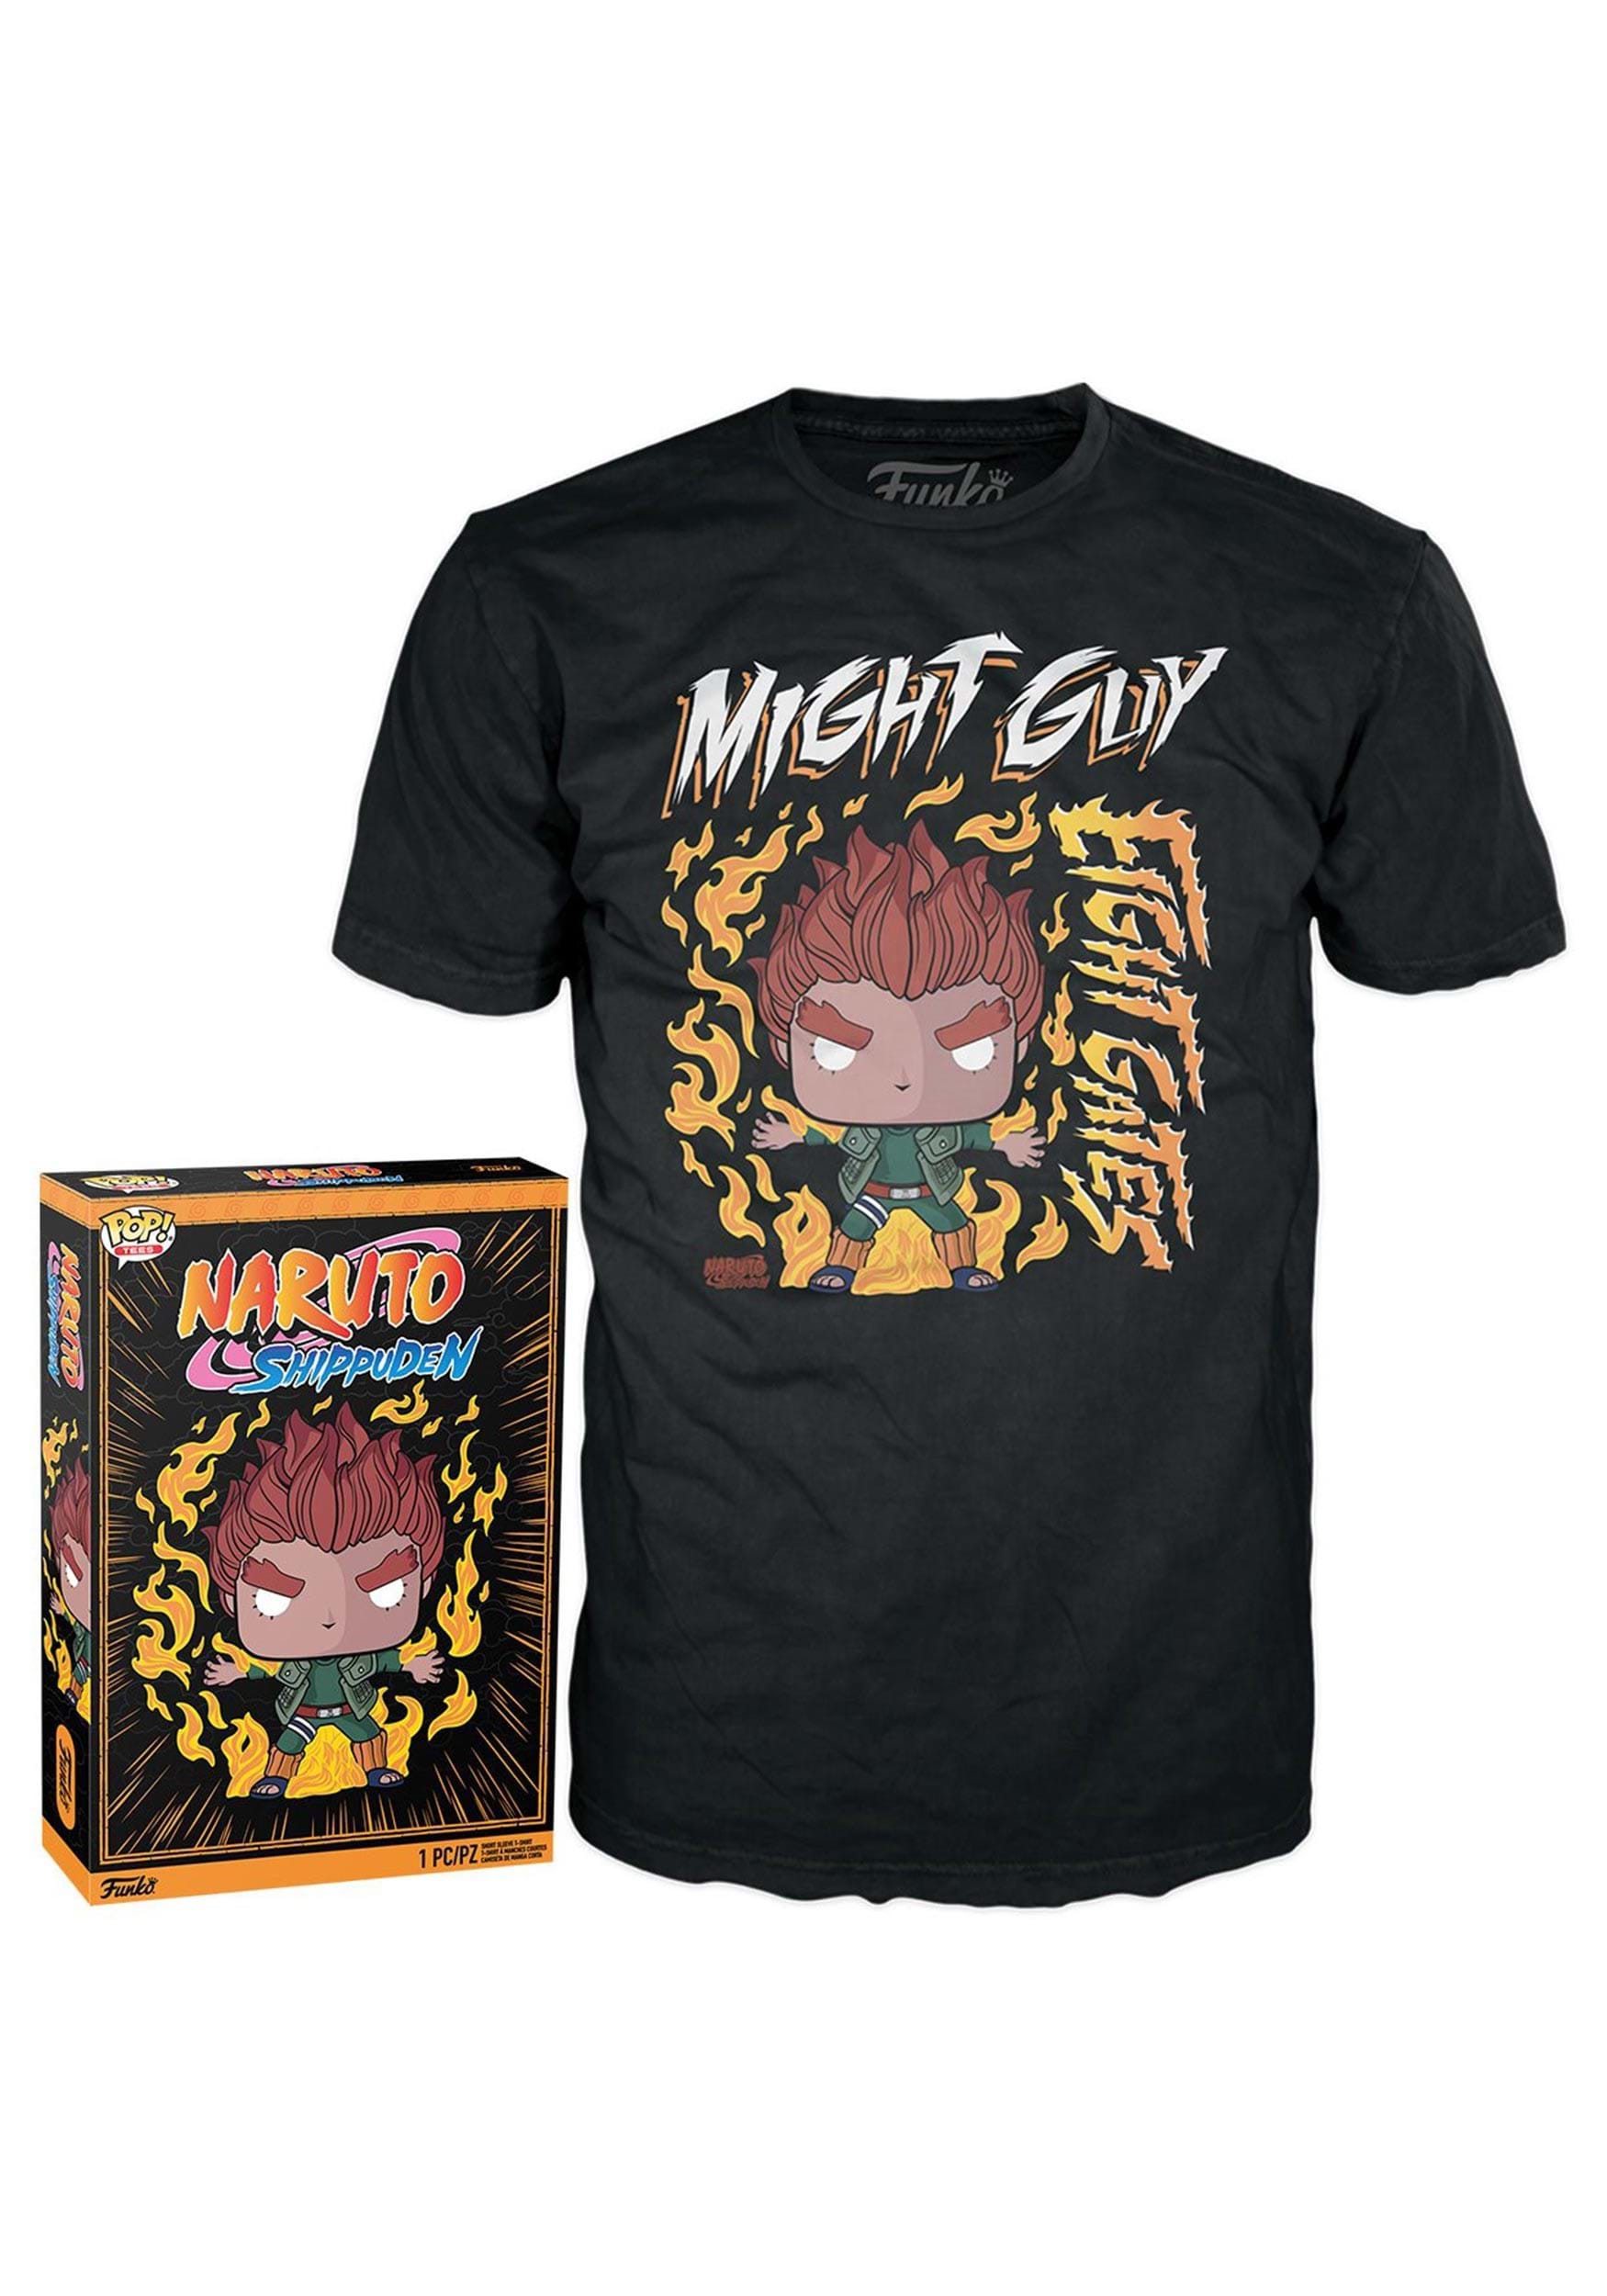 Five Nights at Freddy's Boxed Tee